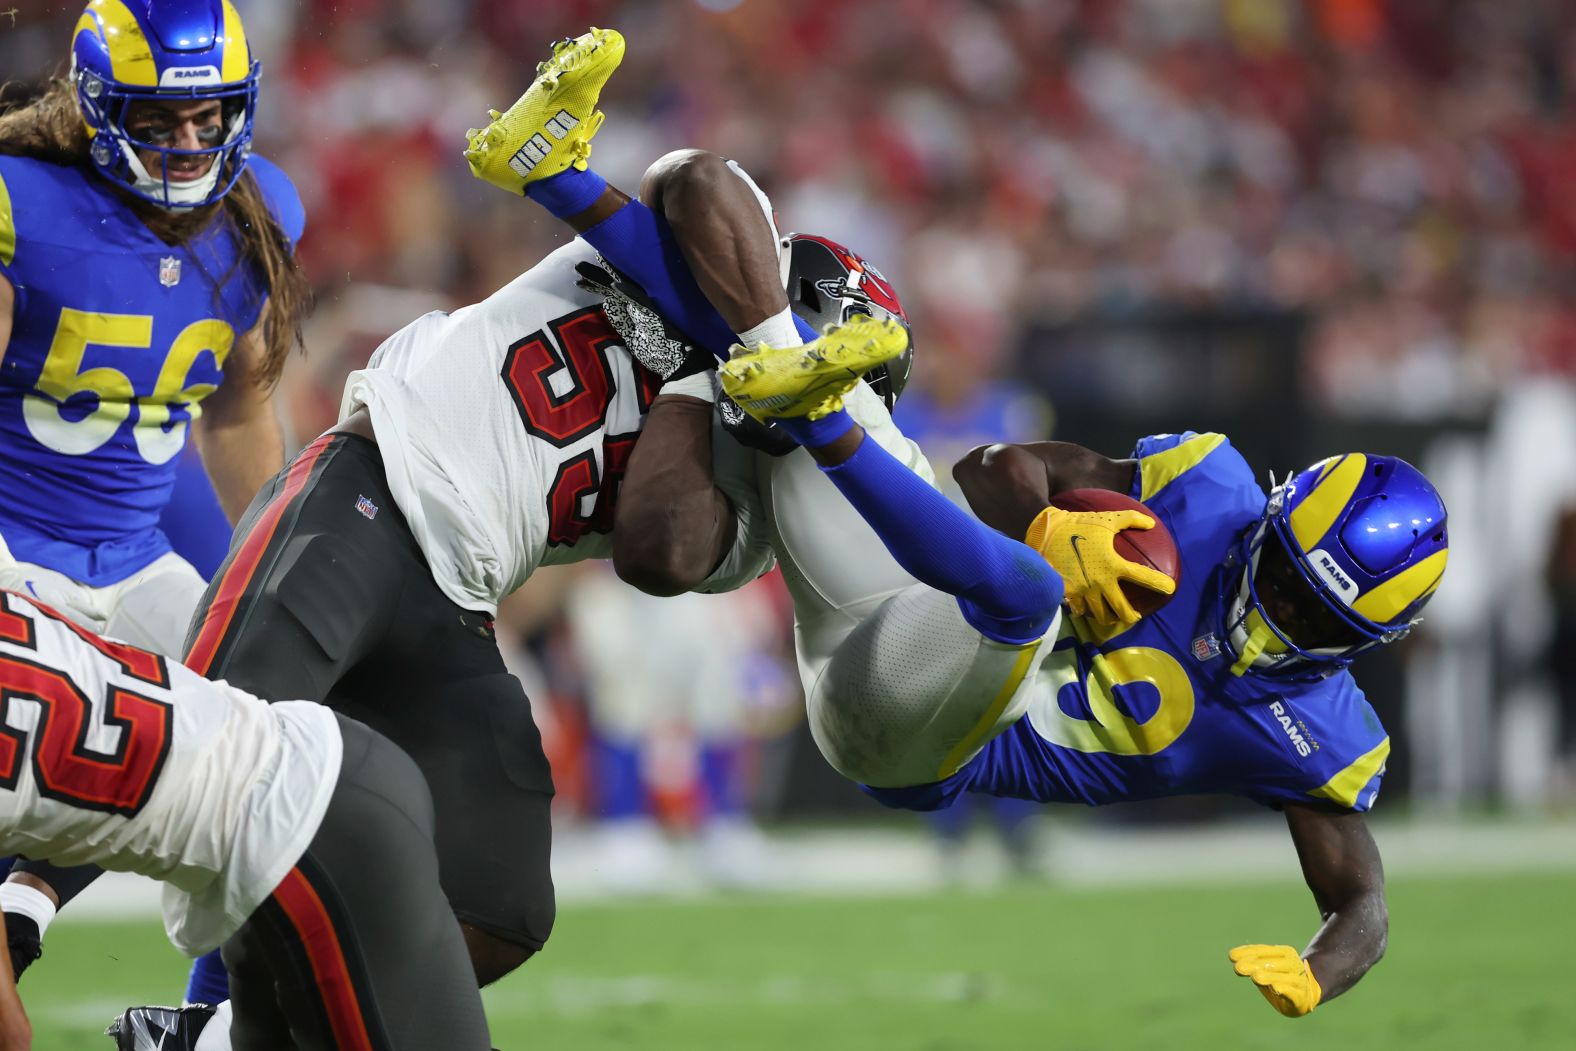 Los Angeles Rams wide receiver Brandon Powell is acrobatically tackled by Tampa Bay Buccaneers linebacker Genard Avery during the first half of their game at Raymond James Stadium. Bucs quarterback <a href="index.php?page=&url=https%3A%2F%2Fwww.cnn.com%2F2022%2F11%2F07%2Fsport%2Ftom-brady-100k-passing-yards-bucs-rams-spt-intl%2Findex.html" target="_blank">Tom Brady threw a one-yard touchdown</a> to tight end Cade Otton with 13 seconds left to complete a 16-13 comeback victory over the reigning Super Bowl champions. 